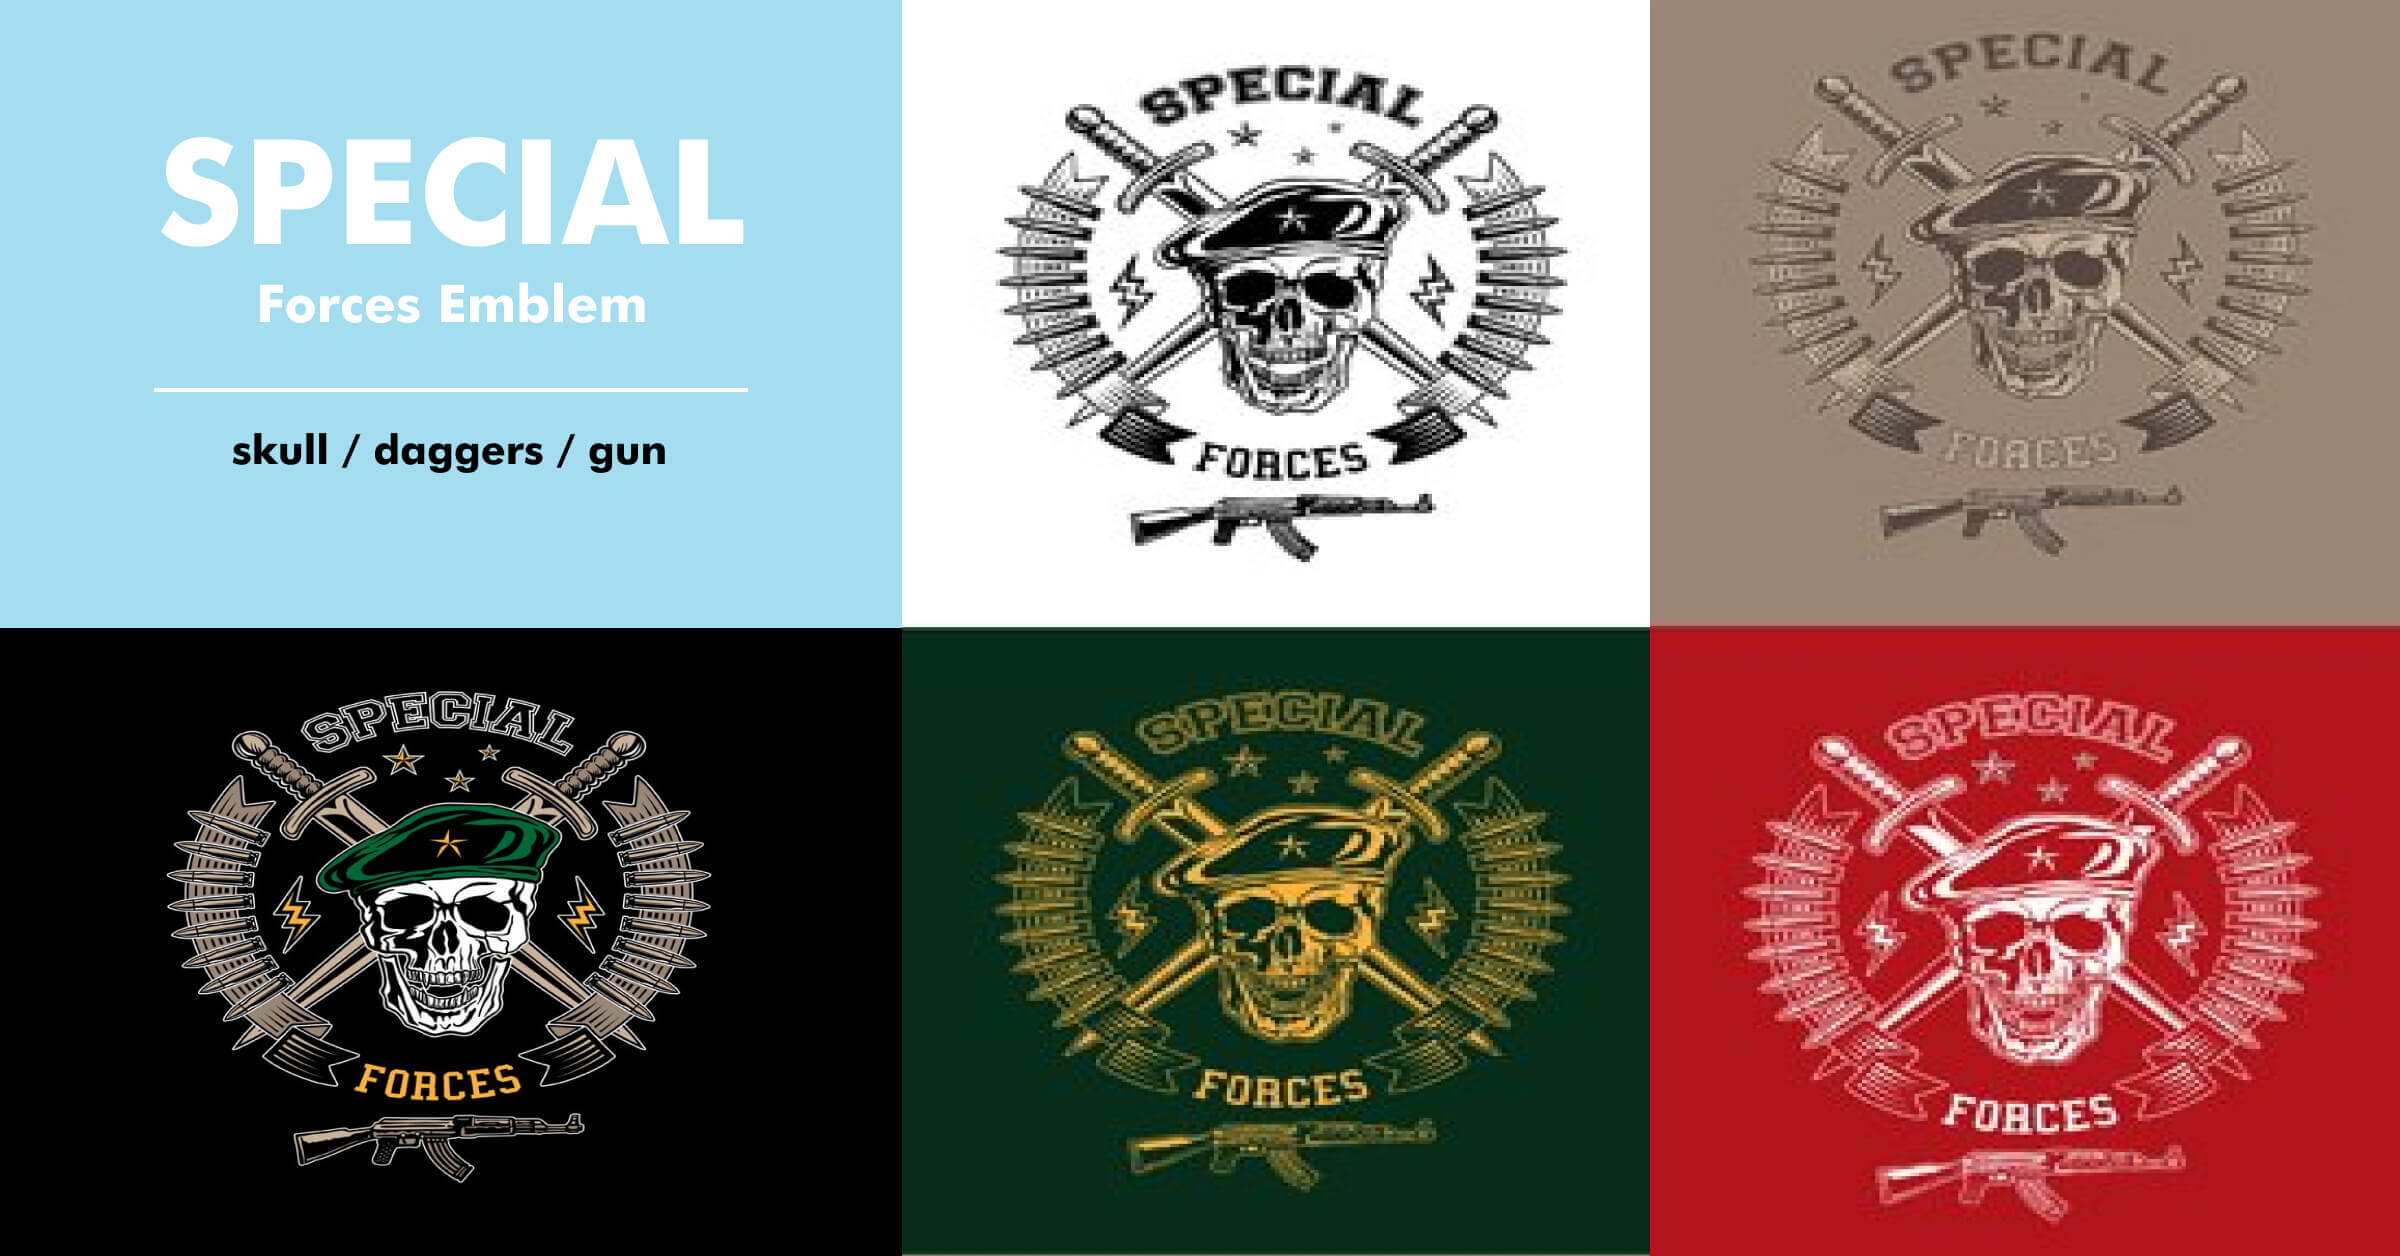 Special forces emblem on the black, red, green, grey and white backgrounds.